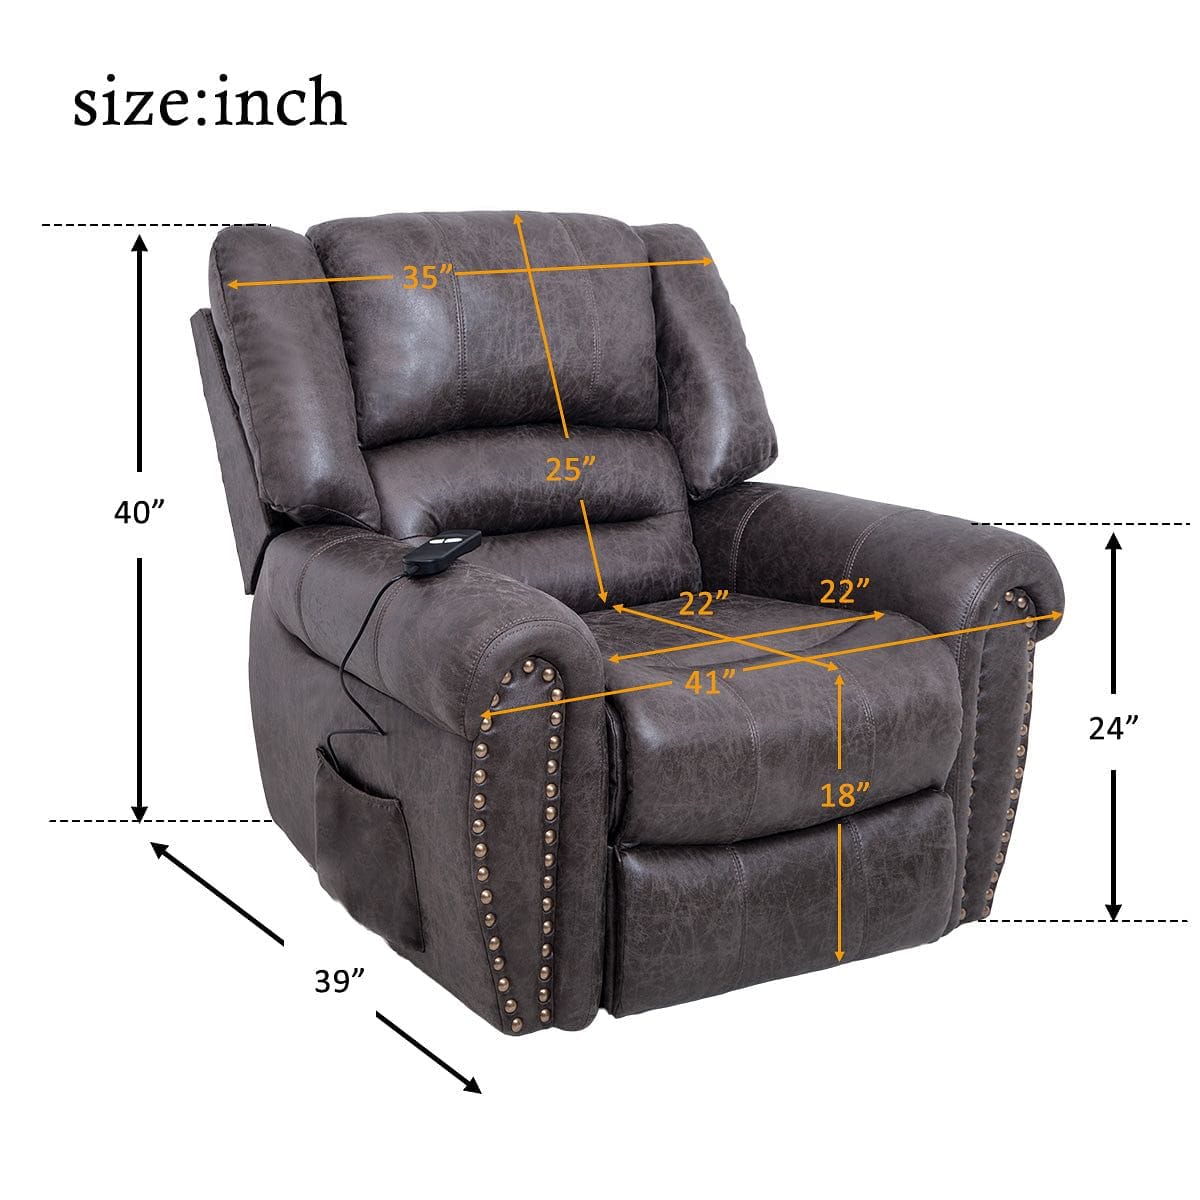 Wilshire Series Heavy-Duty Power Lift Recliner Chair with Built-in Remote and 2 Castors (Smoky Brown)